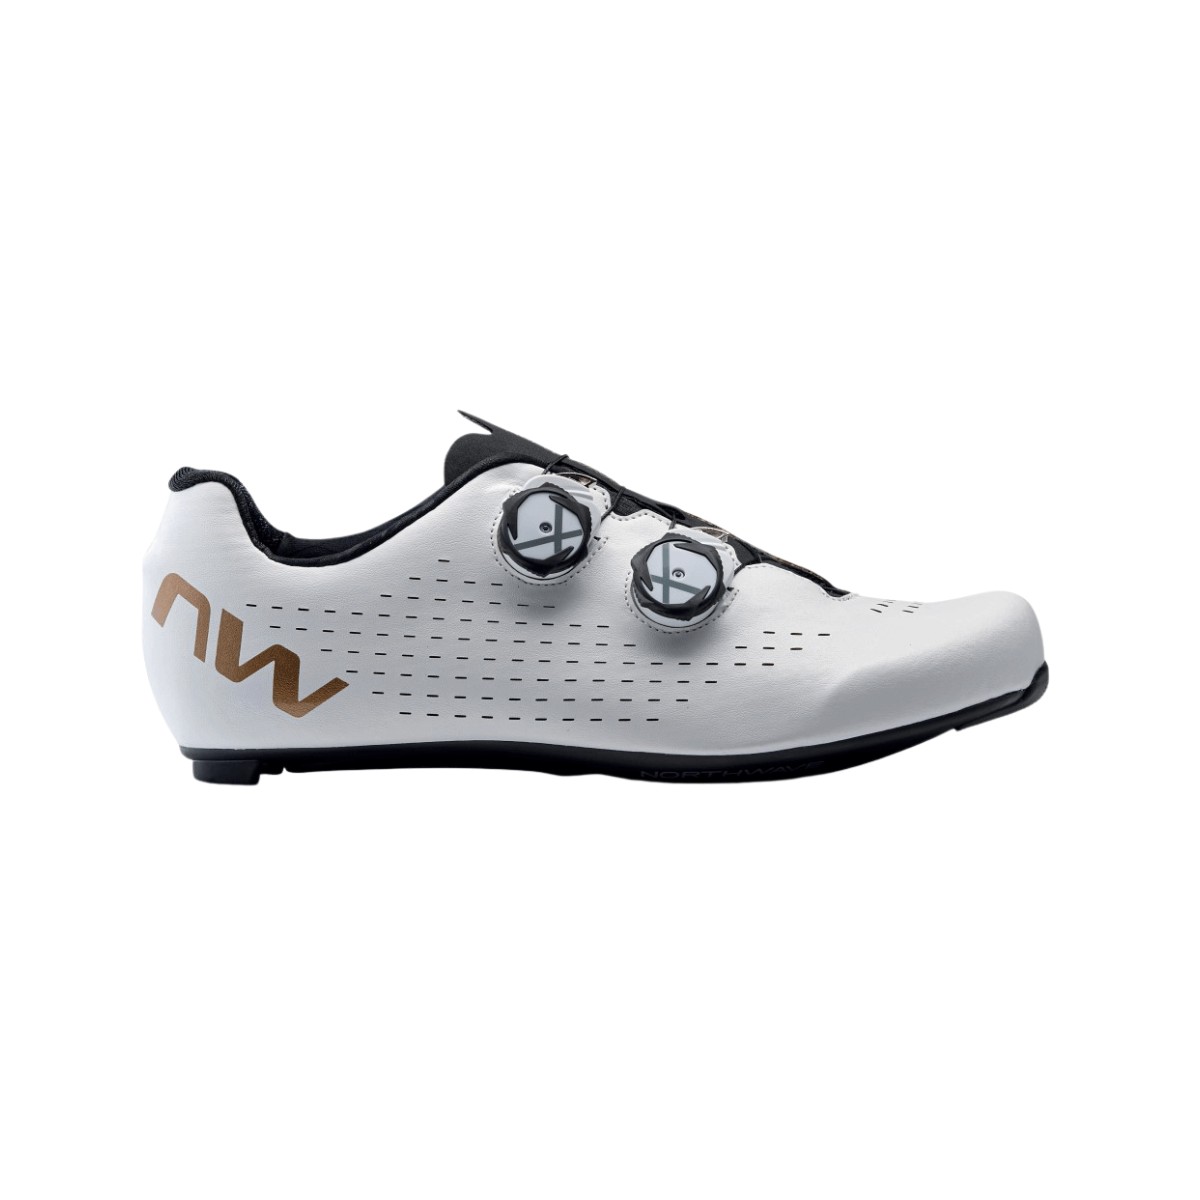 Chaussures Northwave Revolution 3 Blanc Bronce, Taille 47 - EUR